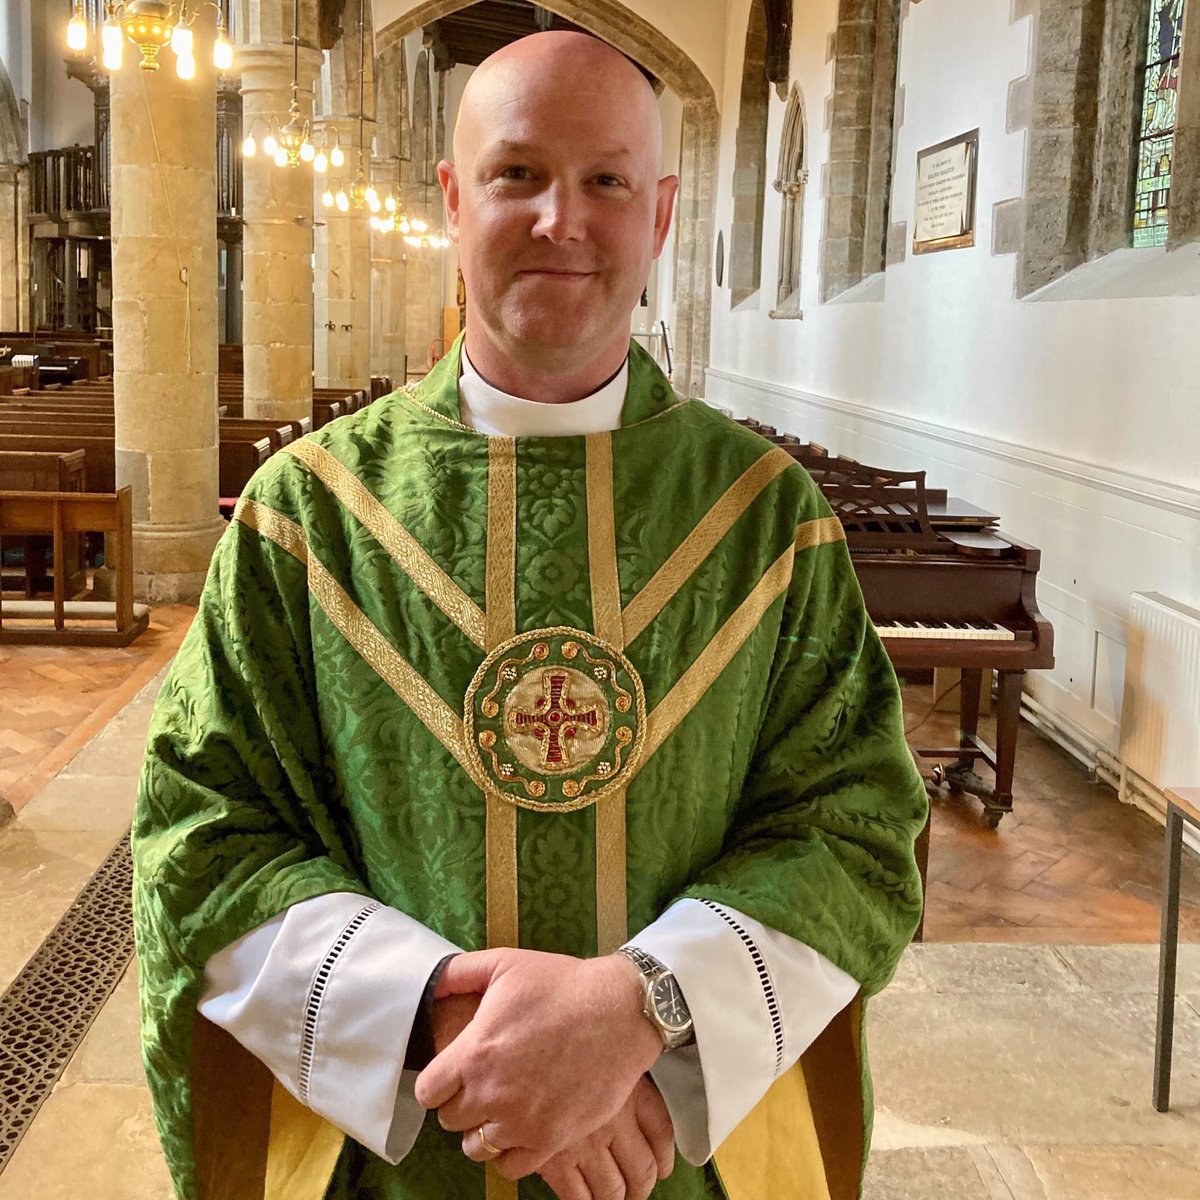 Today I celebrate the 20th anniversary of my ordination to the priesthood. I give thanks to God for those who've encouraged me in my vocation over the years and those I've had the pleasure of serving in Eastleigh, Northumbria University, Newcastle and Durham University